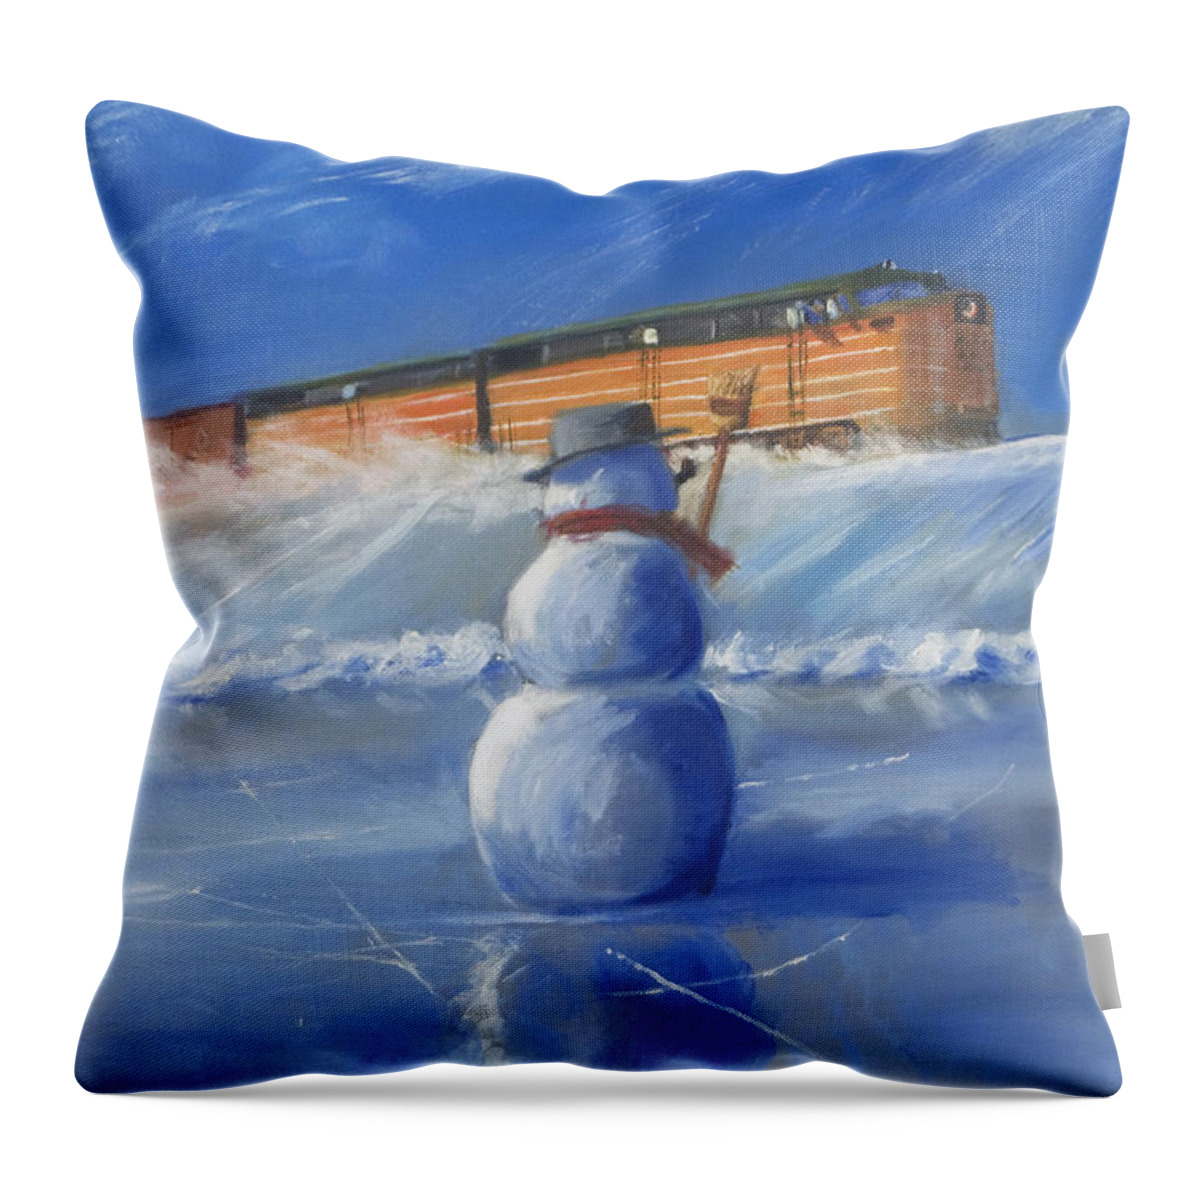 Train Throw Pillow featuring the painting Greetings by Christopher Jenkins